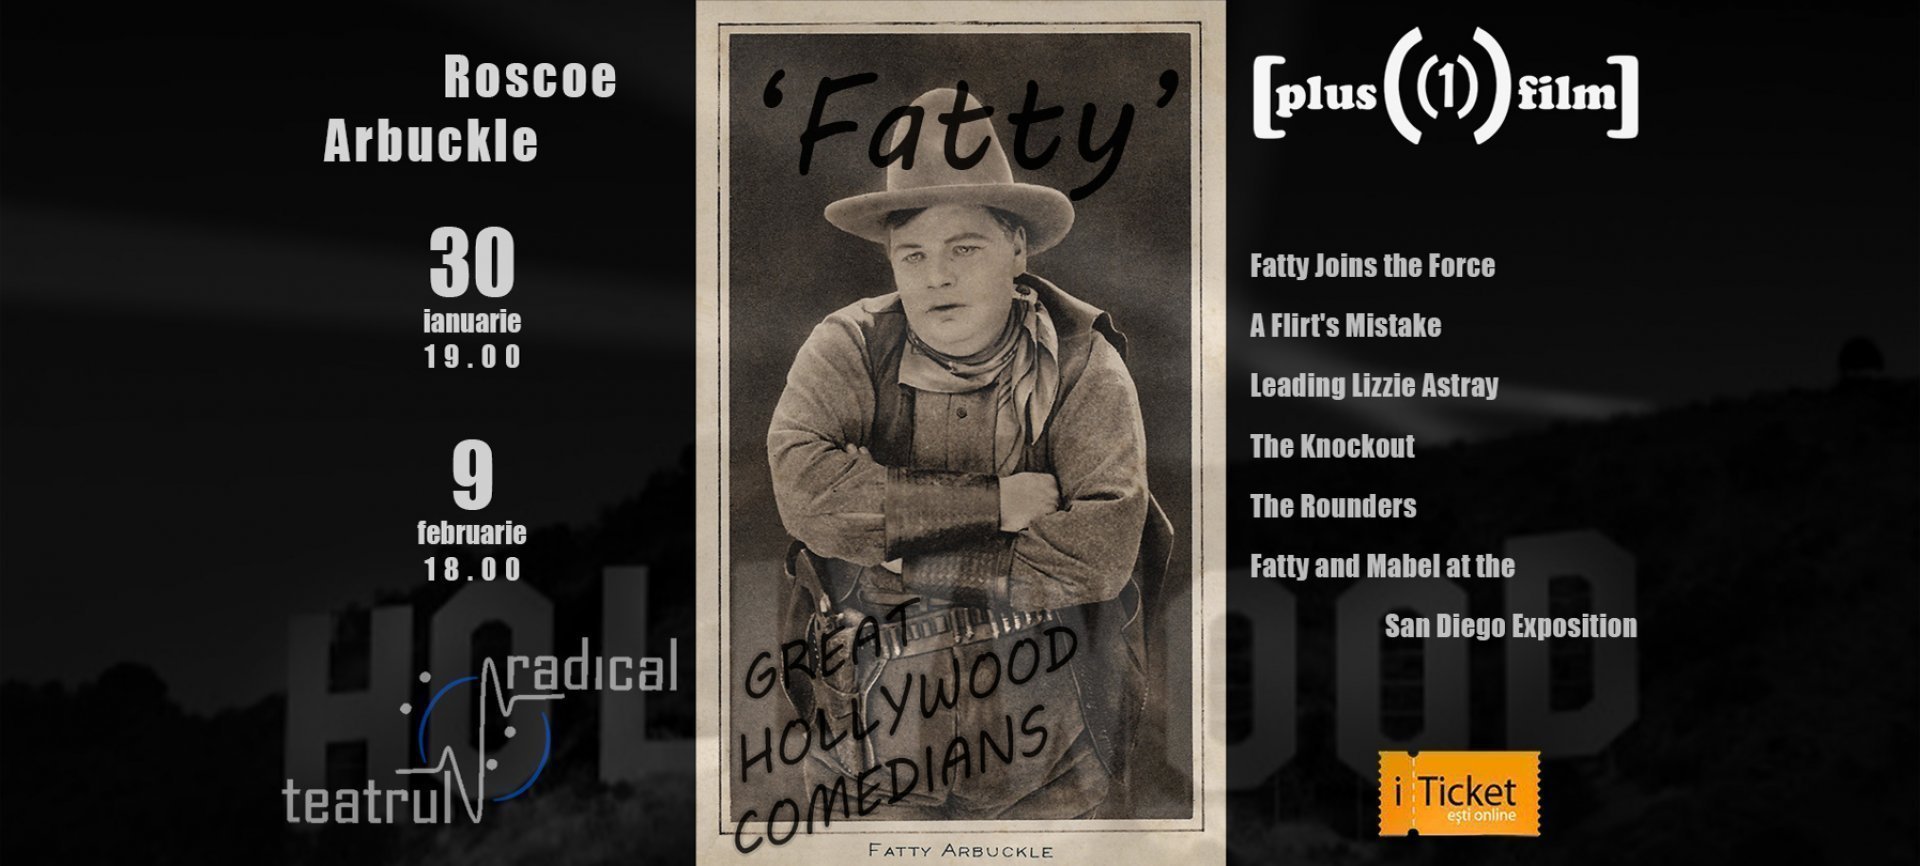 GREAT HOLLYWOOD COMEDIANS - Short films by Roscoe "Fatty" Arbuckle